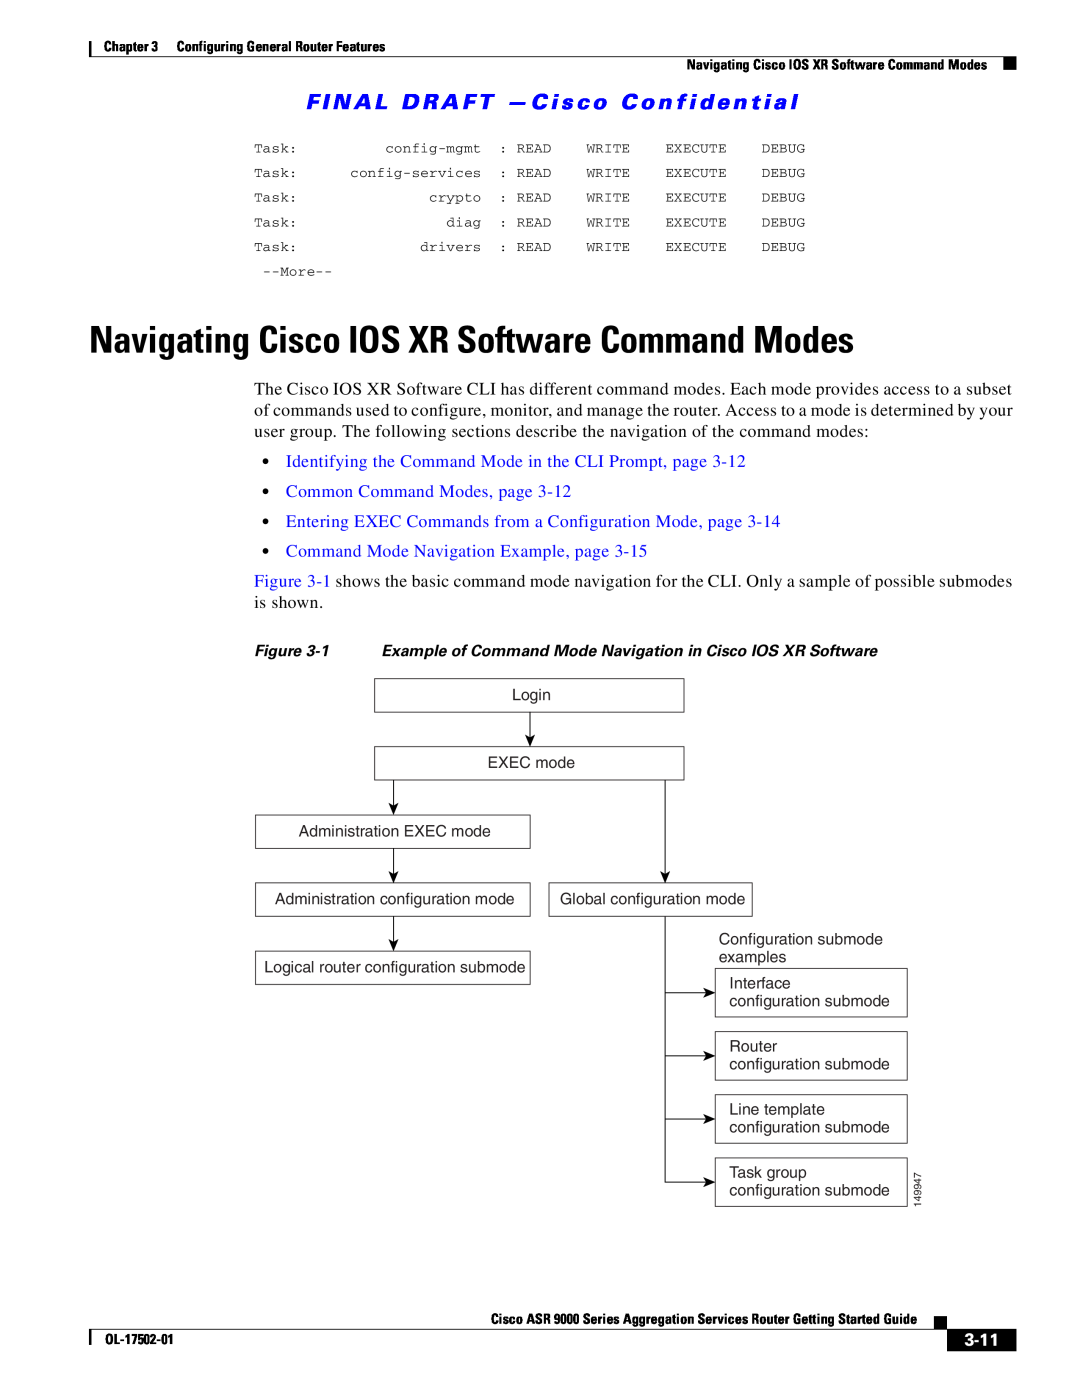 Cisco Systems A9KMOD80TR, ASR 9000 manual Navigating Cisco IOS XR Software Command Modes, Common Command Modes, page, 3-11 